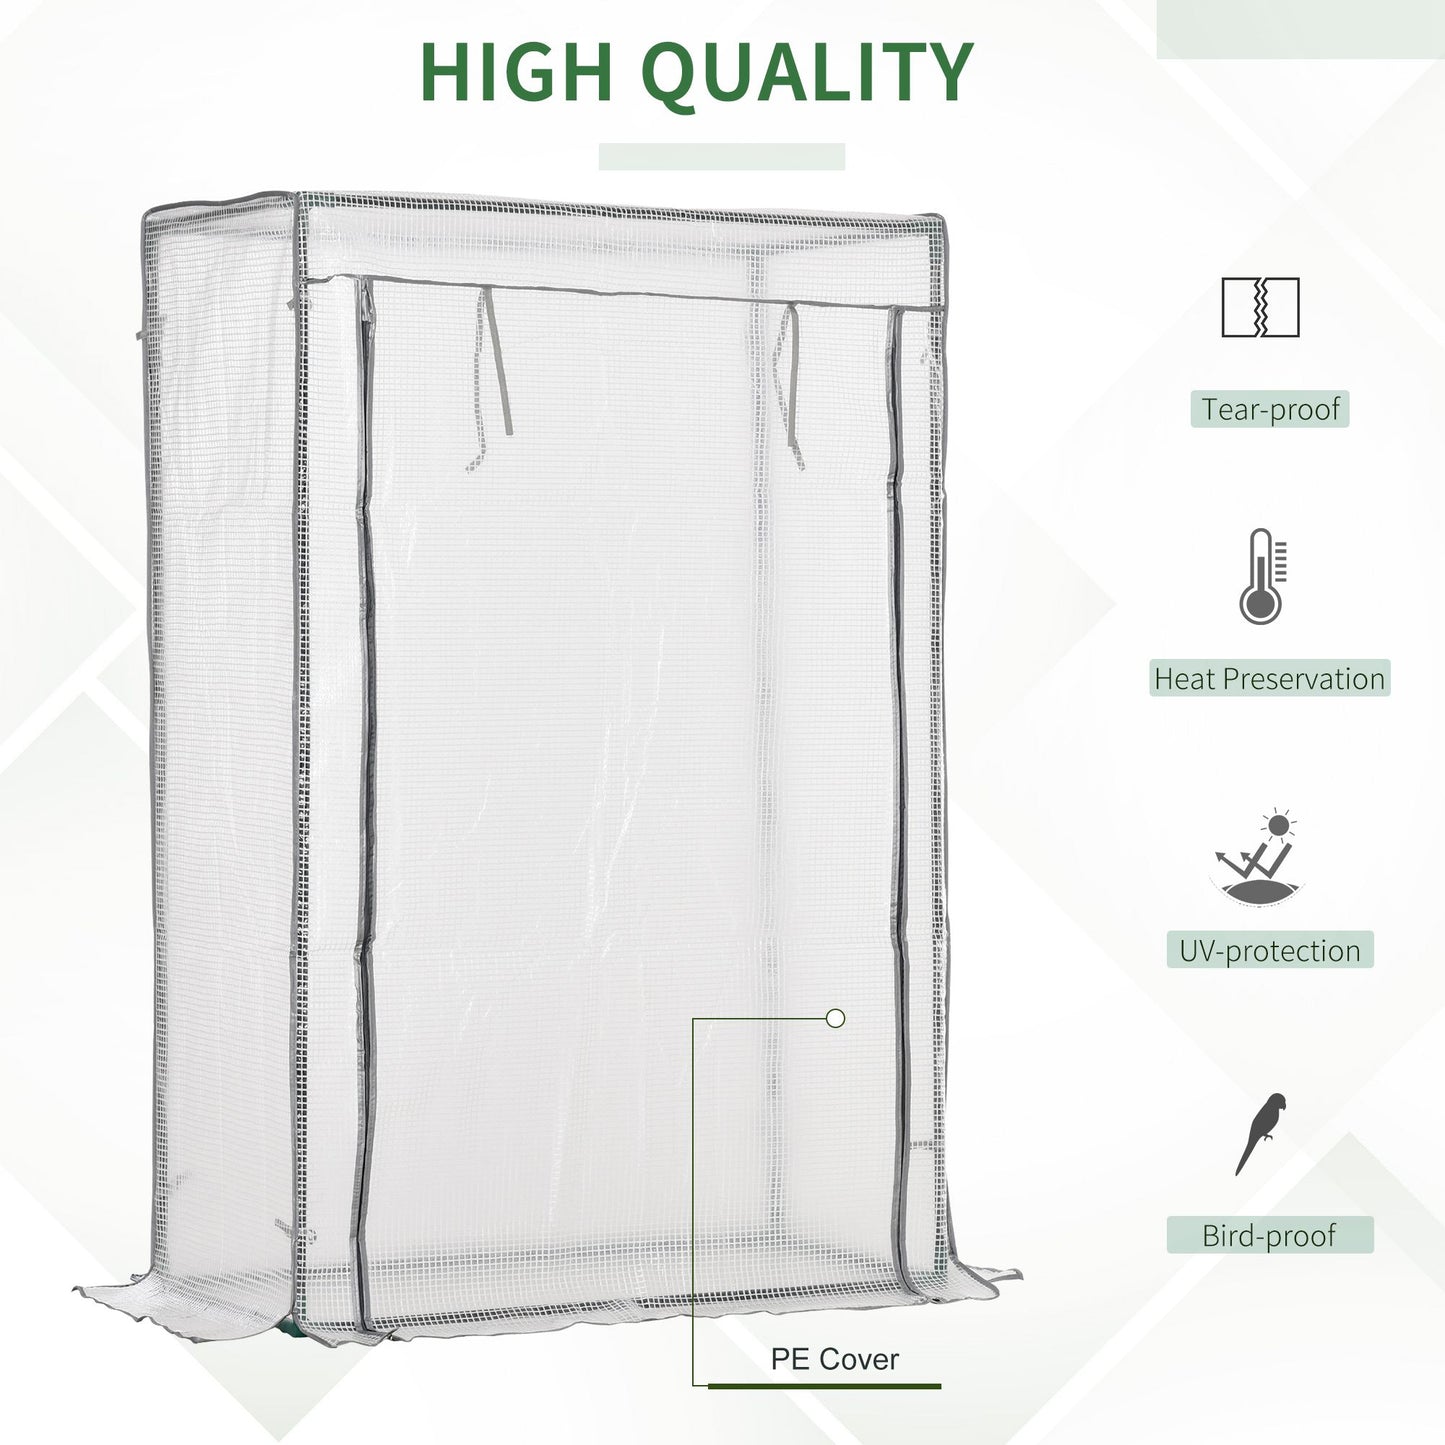 Outsunny Greenhouse Oasis: Steel-Framed PE Shelter with Roll-Up Door, White